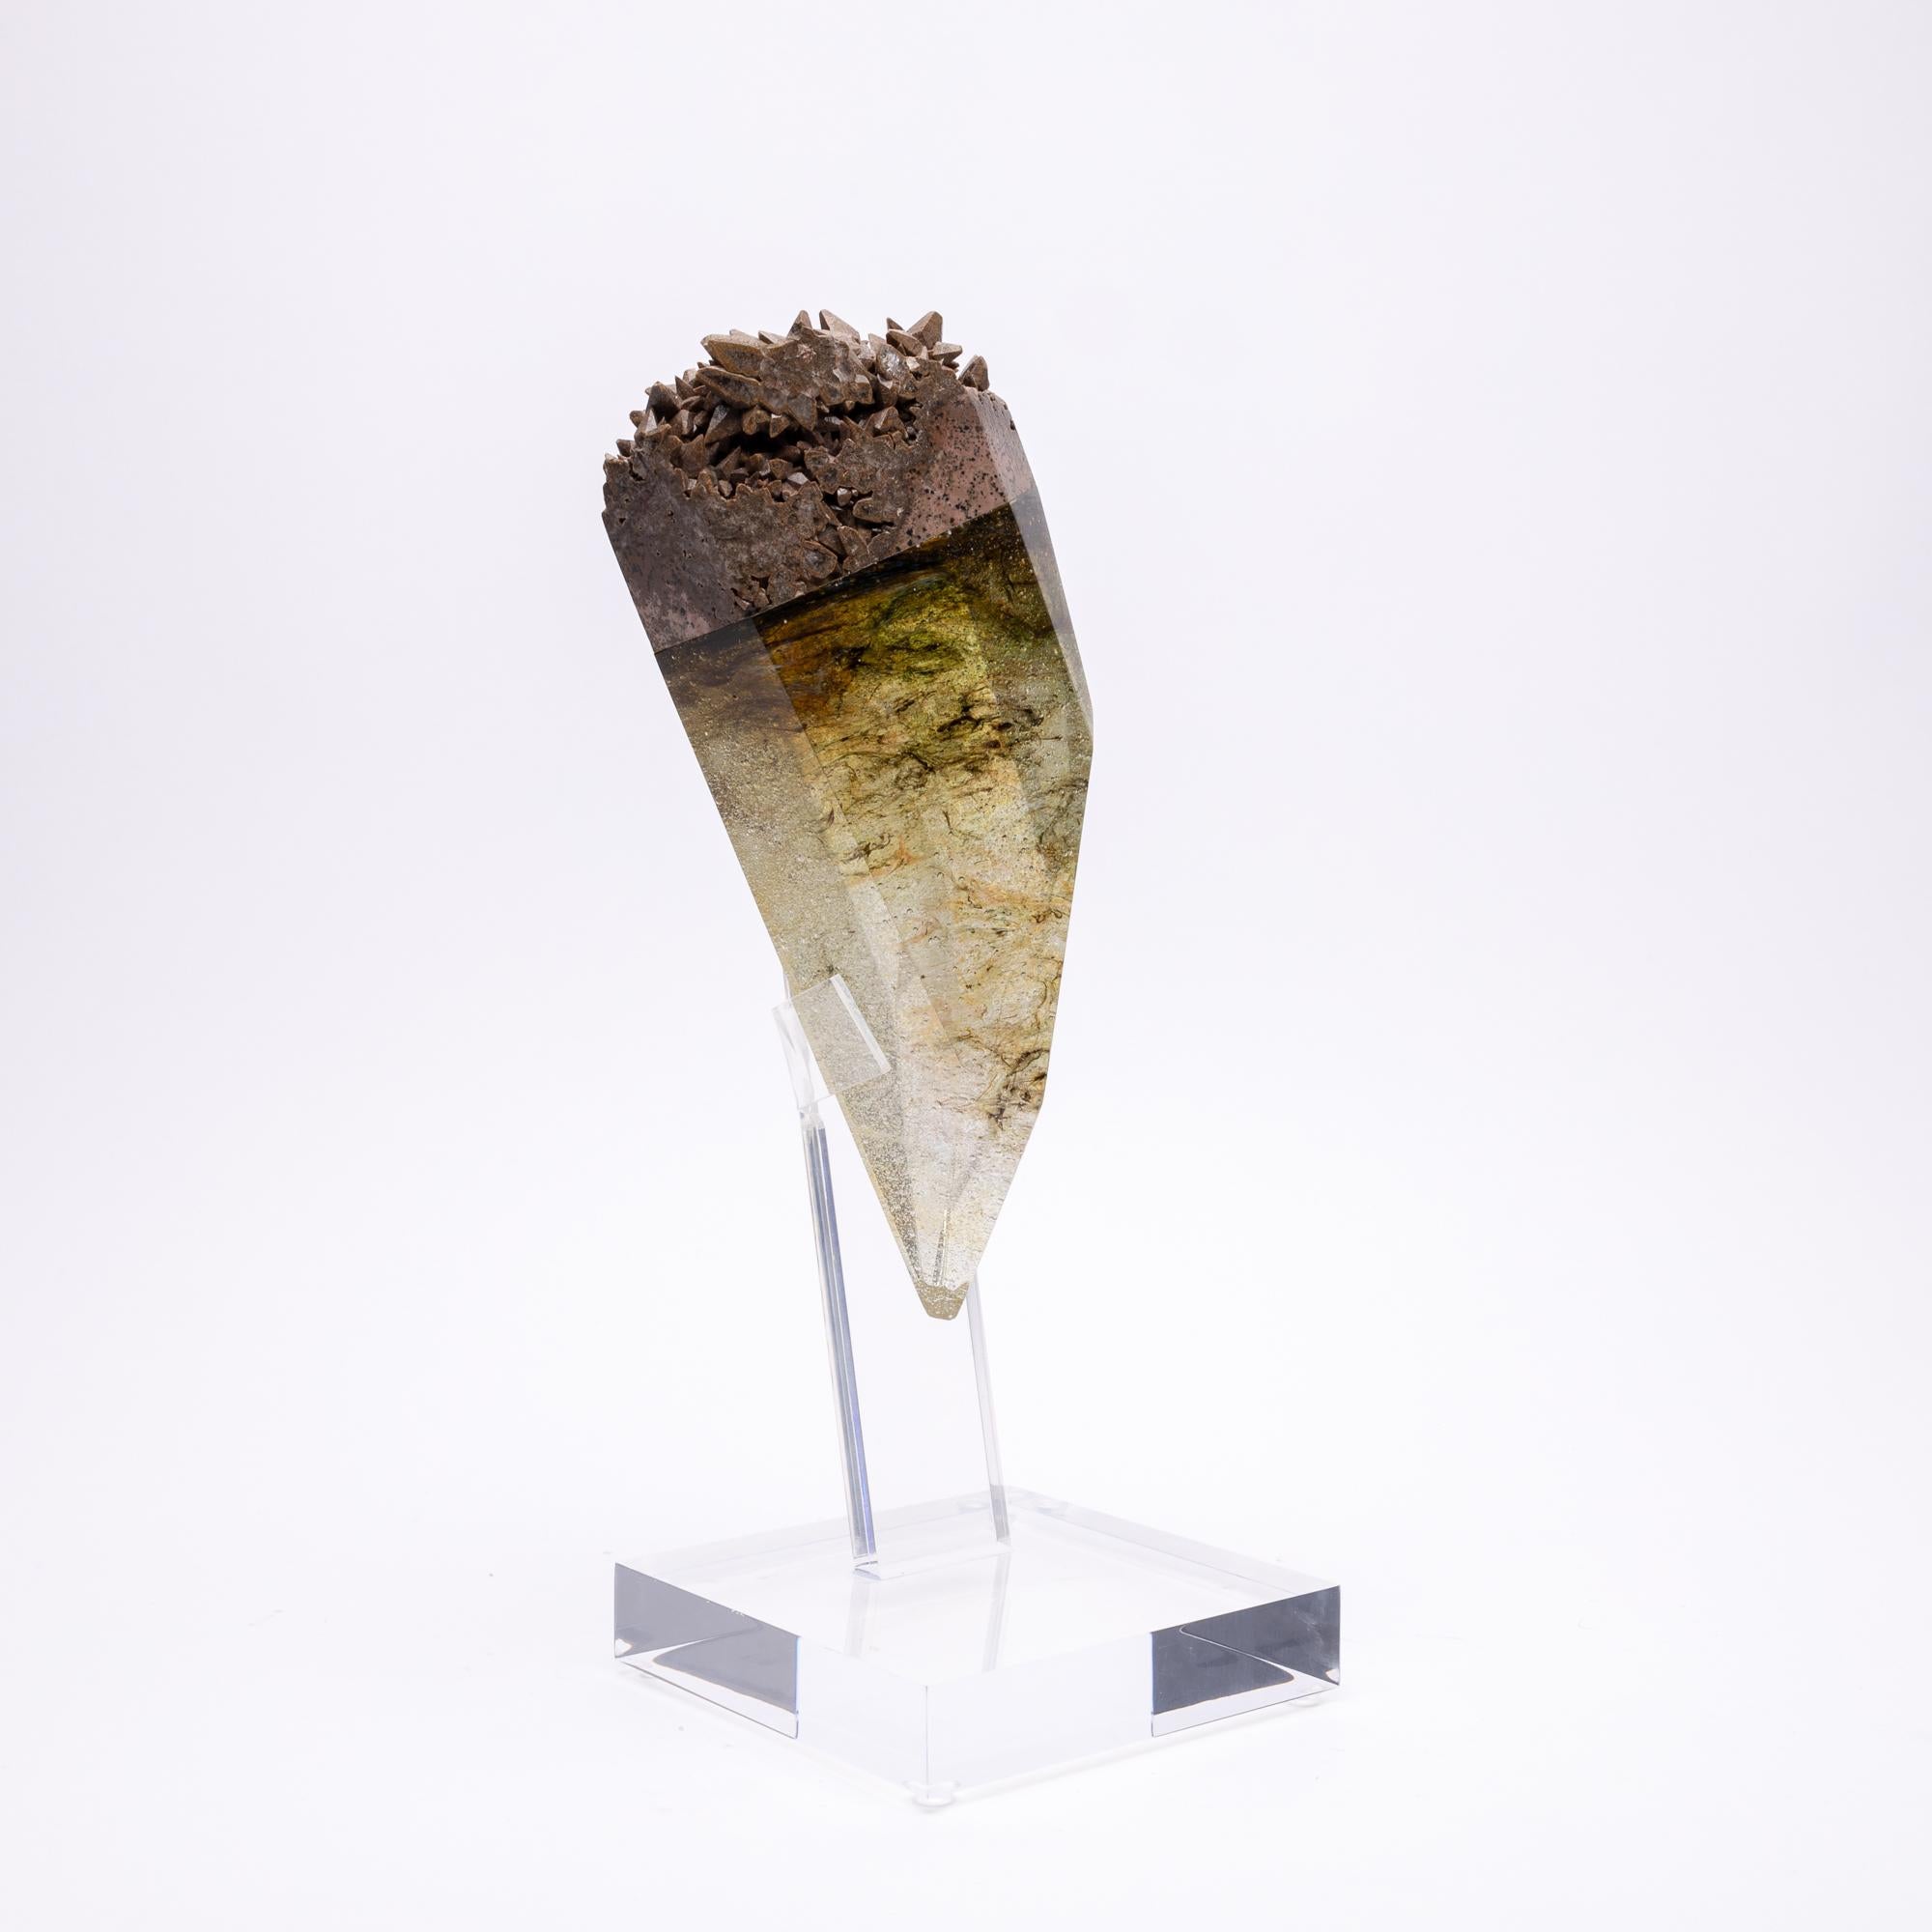 Kleat, Chocolate Calcite and glass sculpture from TYME Collection, a collaboration by Orfeo Quagliata and Ernesto Durán

TYME collection
A dance between purity and detail bring a creation of unique pieces merging nature’s gems and human